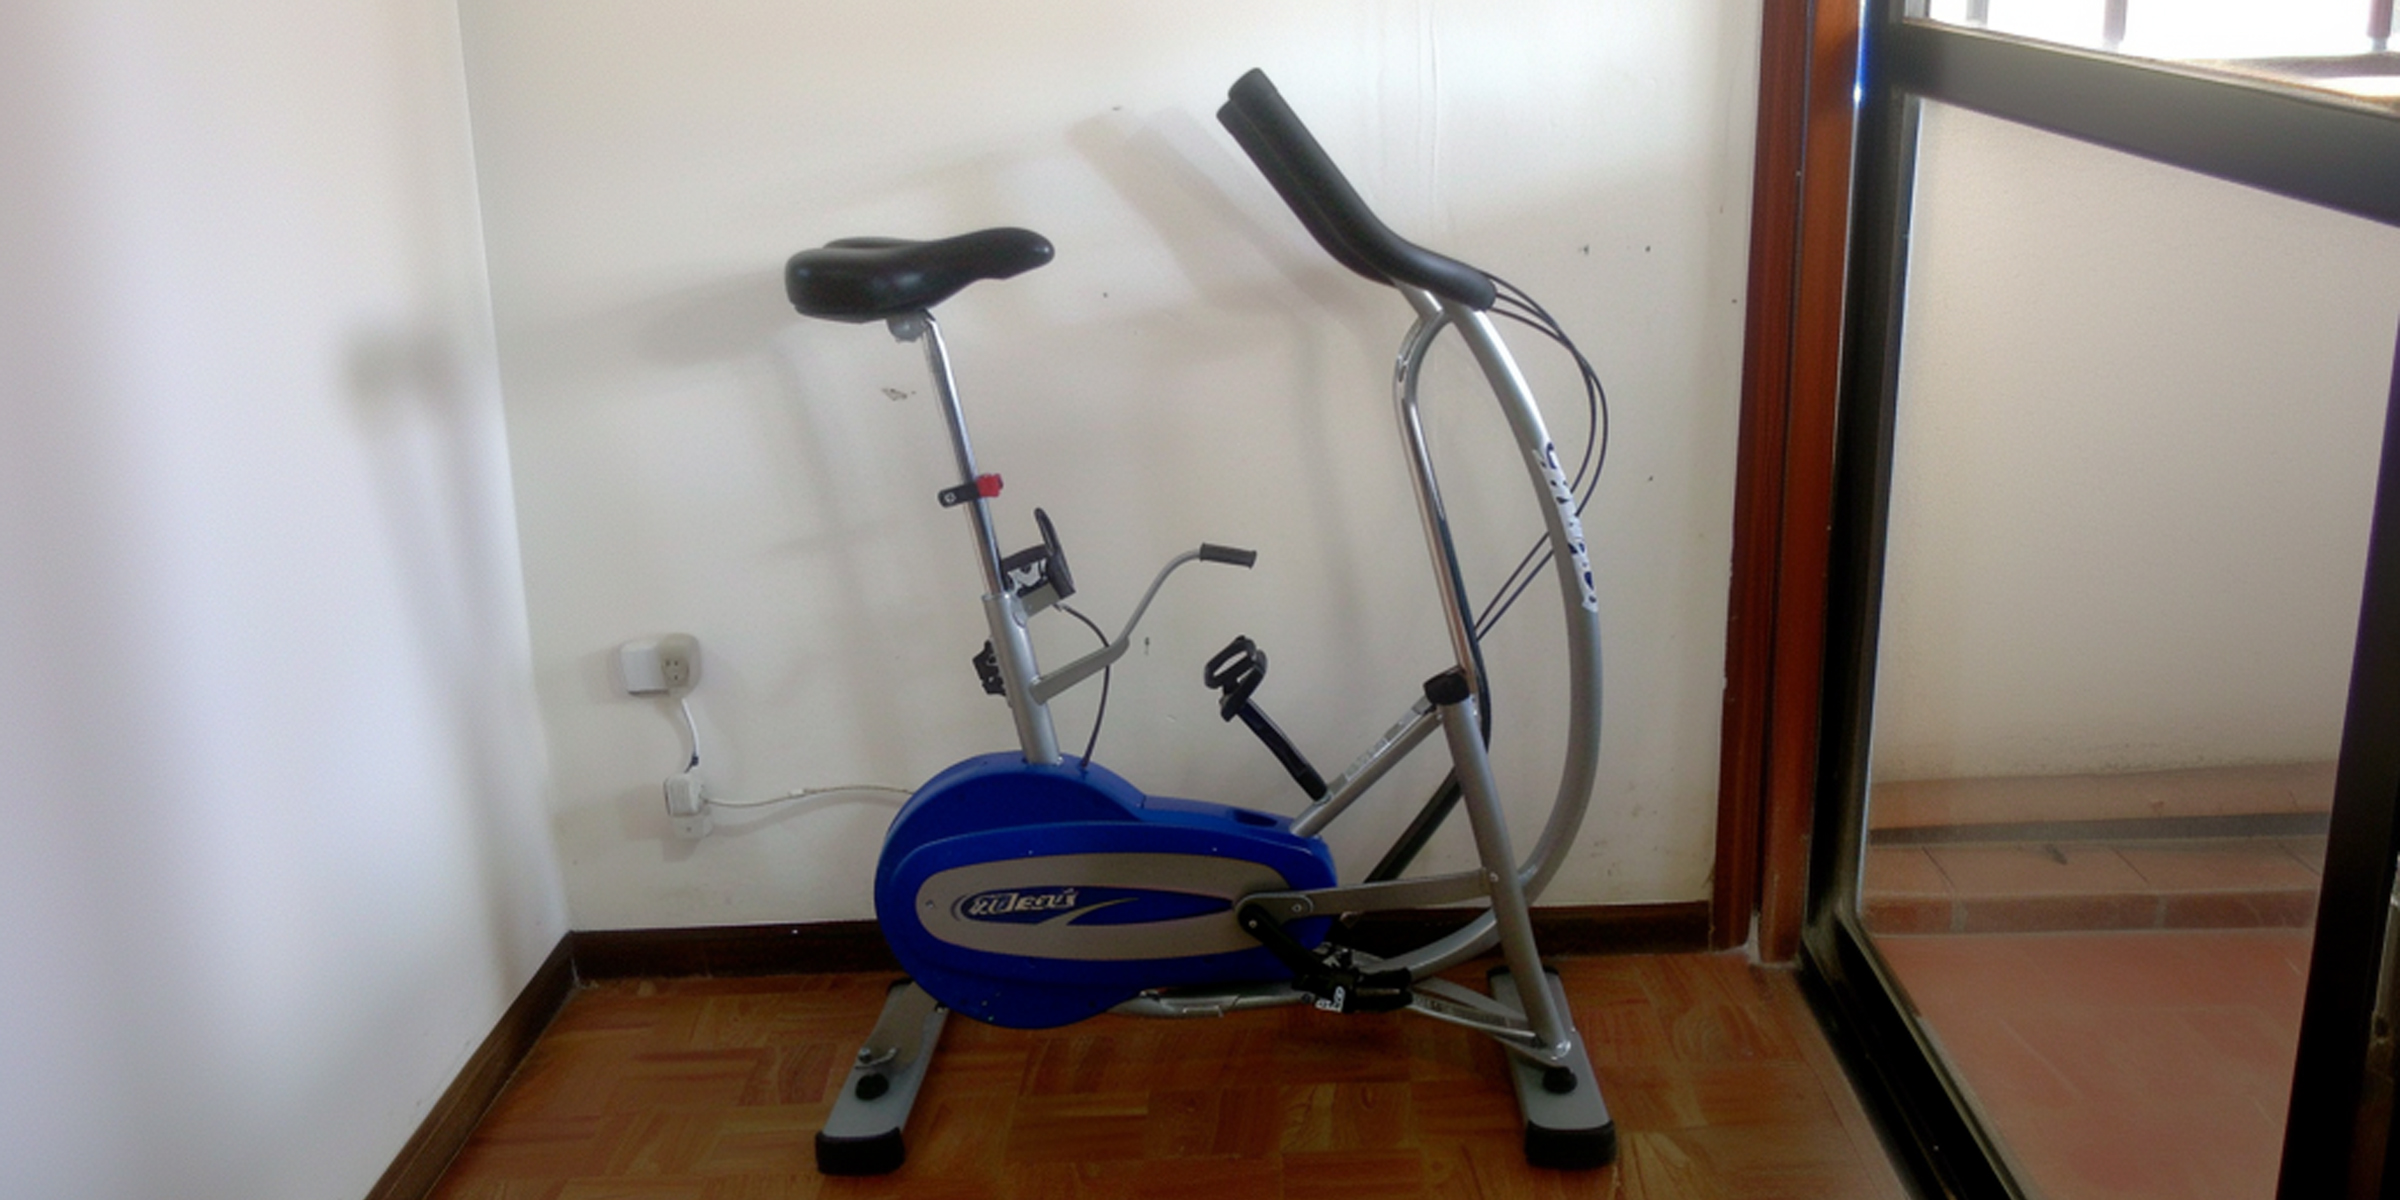 A run-of-the-mill exercise bicycle | Source: Amomama